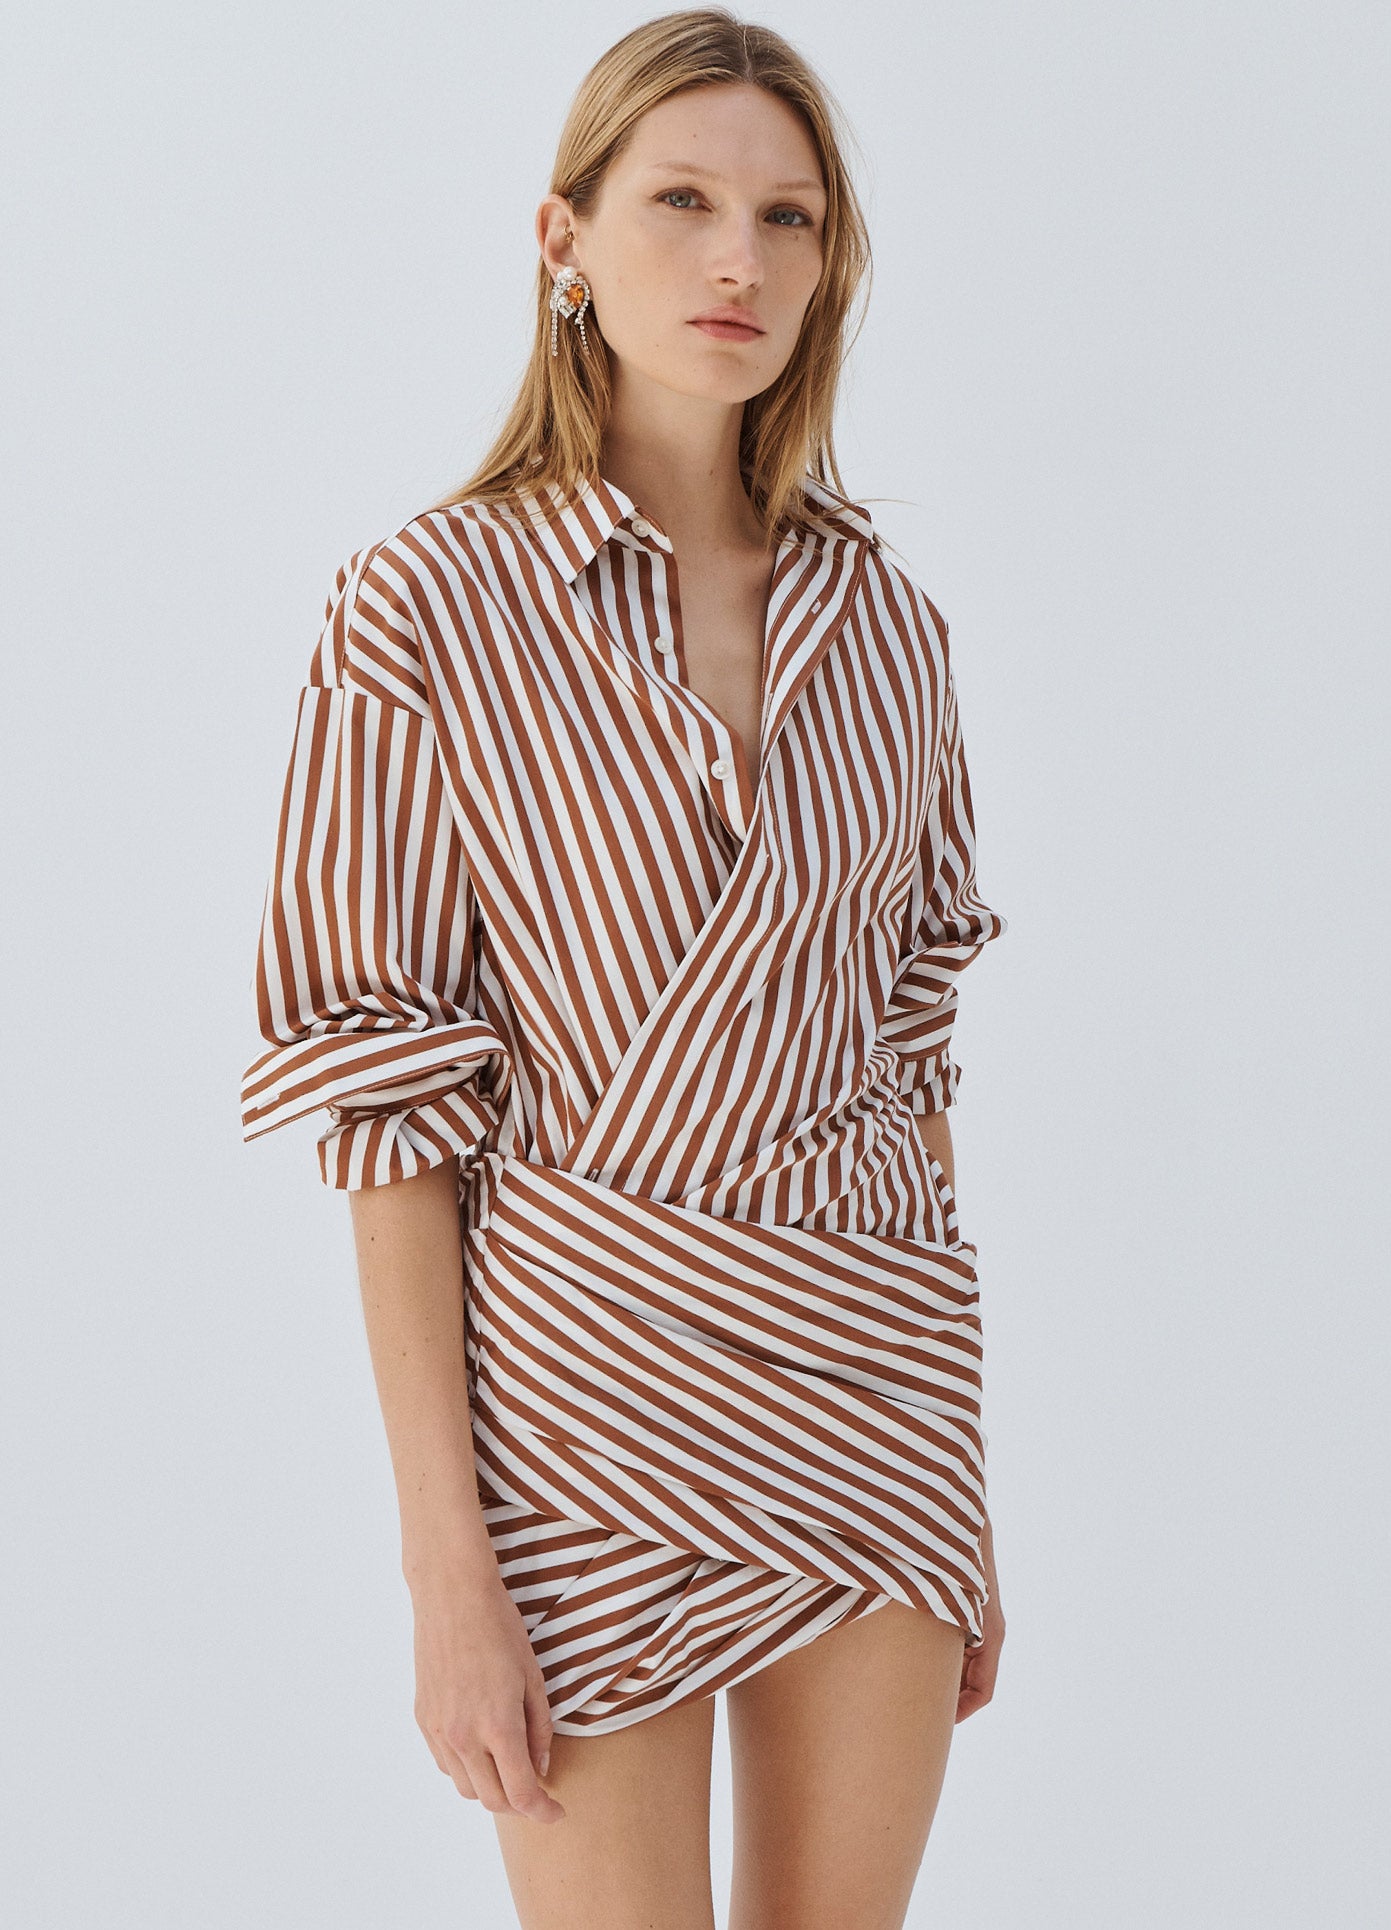 MONSE Striped Wrap Shirt Dress in Brown and Ivory on Model Front Tilted View